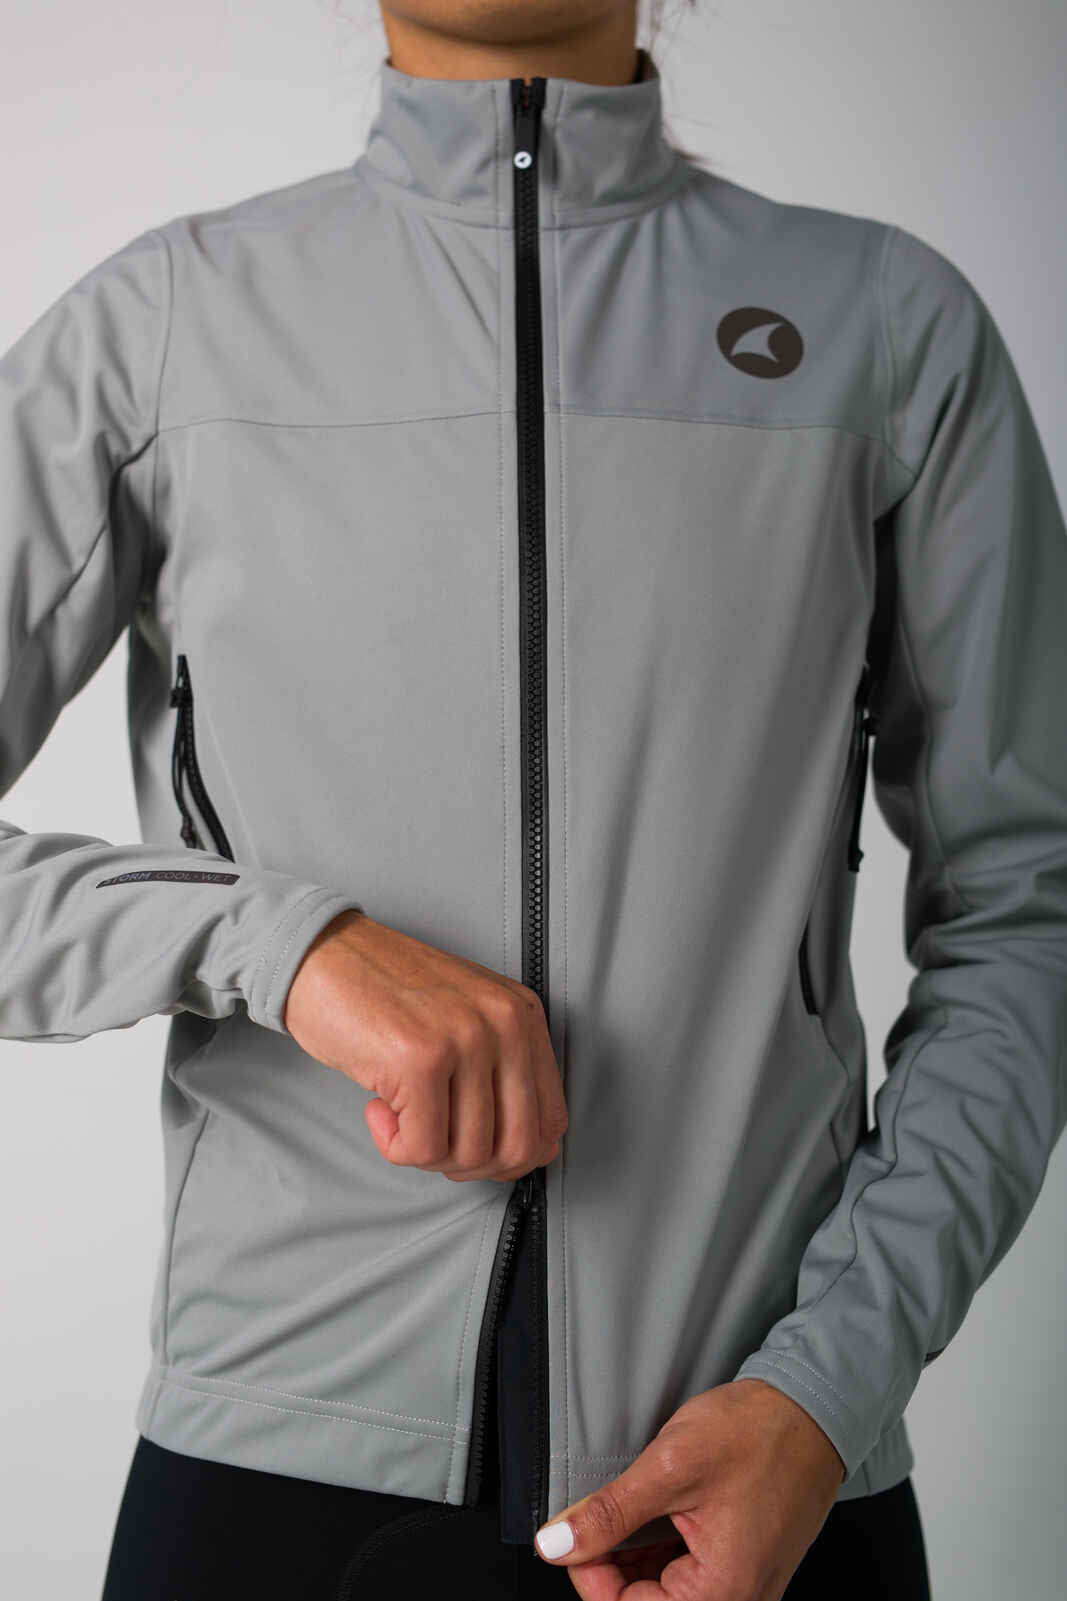 Women's Gray Cycling Jacket for Cold Wet Weather - Two-Way Zipper